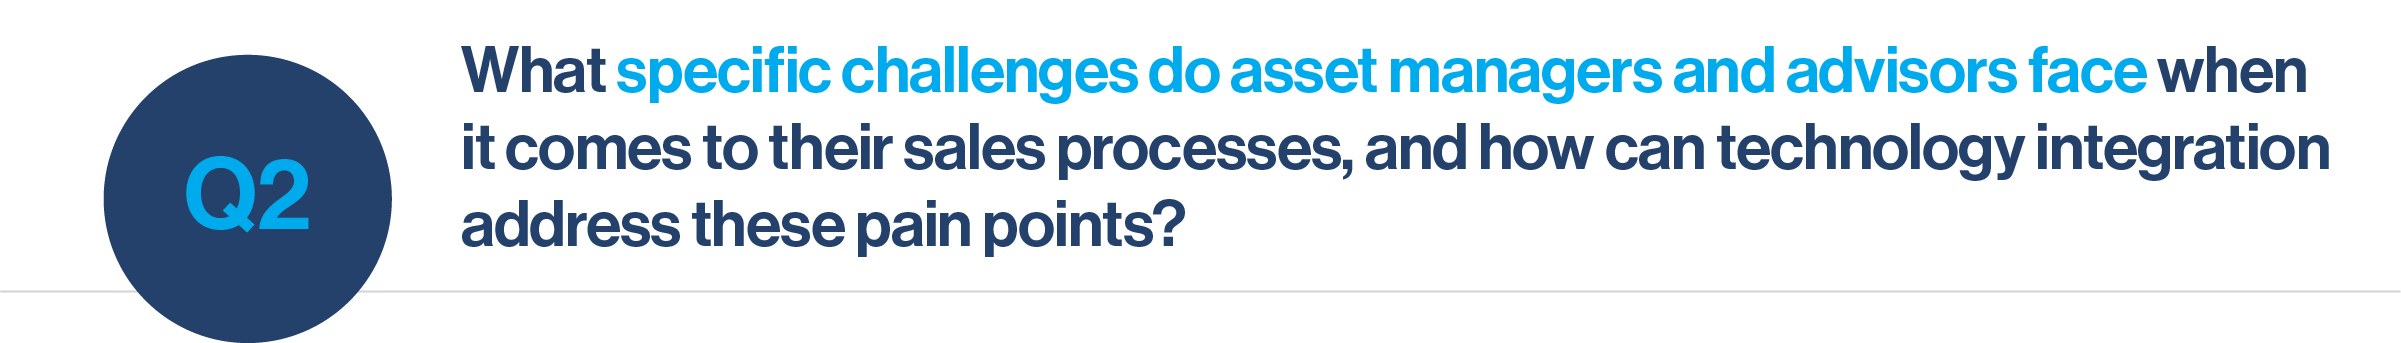 Question 2 What specific challenges do asset managers and advisors face when it comes to their sales processes, and how can technology integration address these pain points?